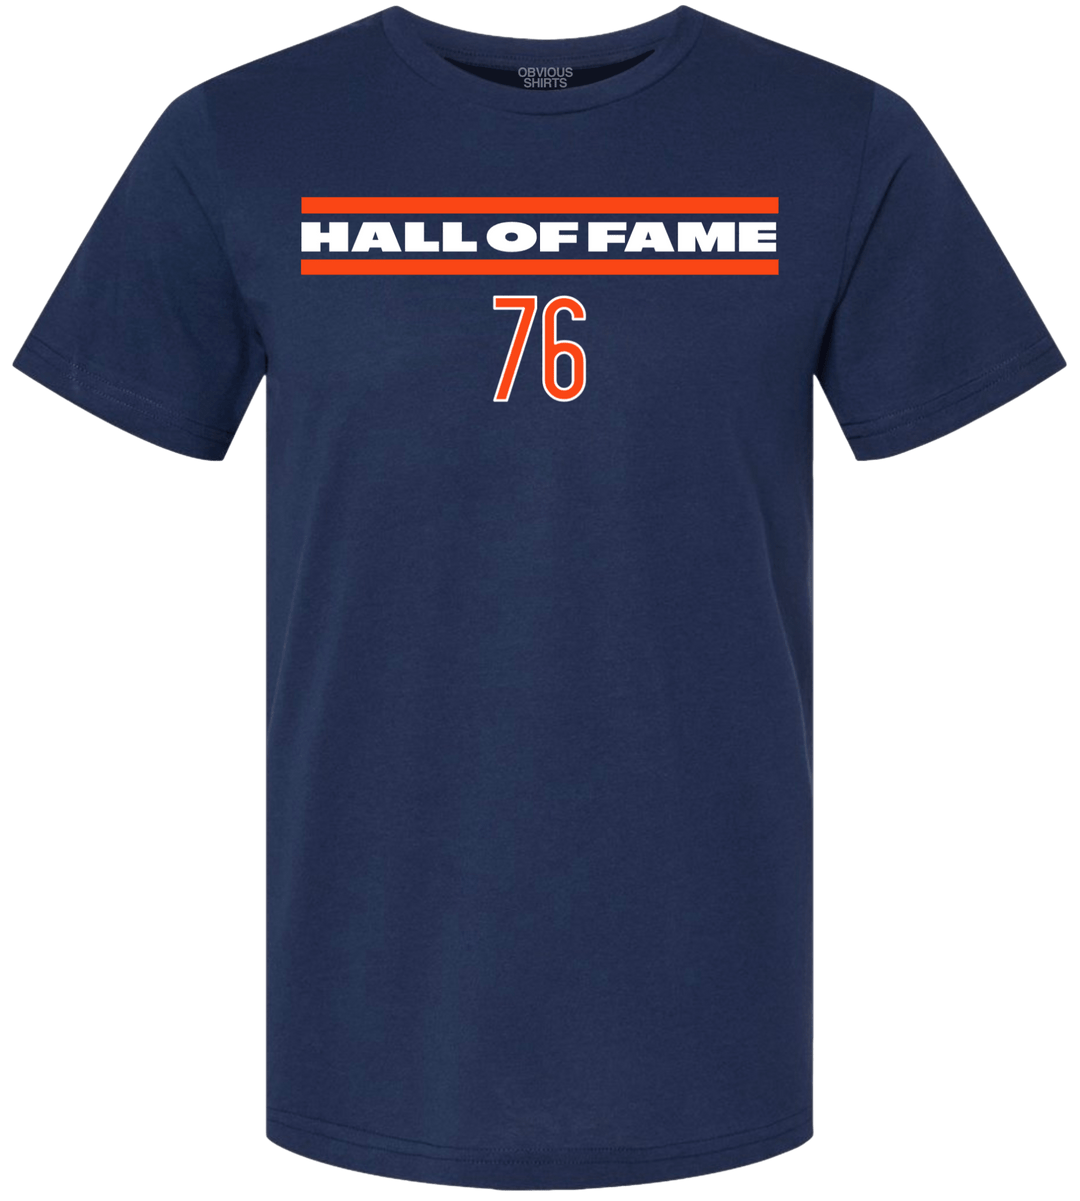 HALL OF FAME #76 - OBVIOUS SHIRTS